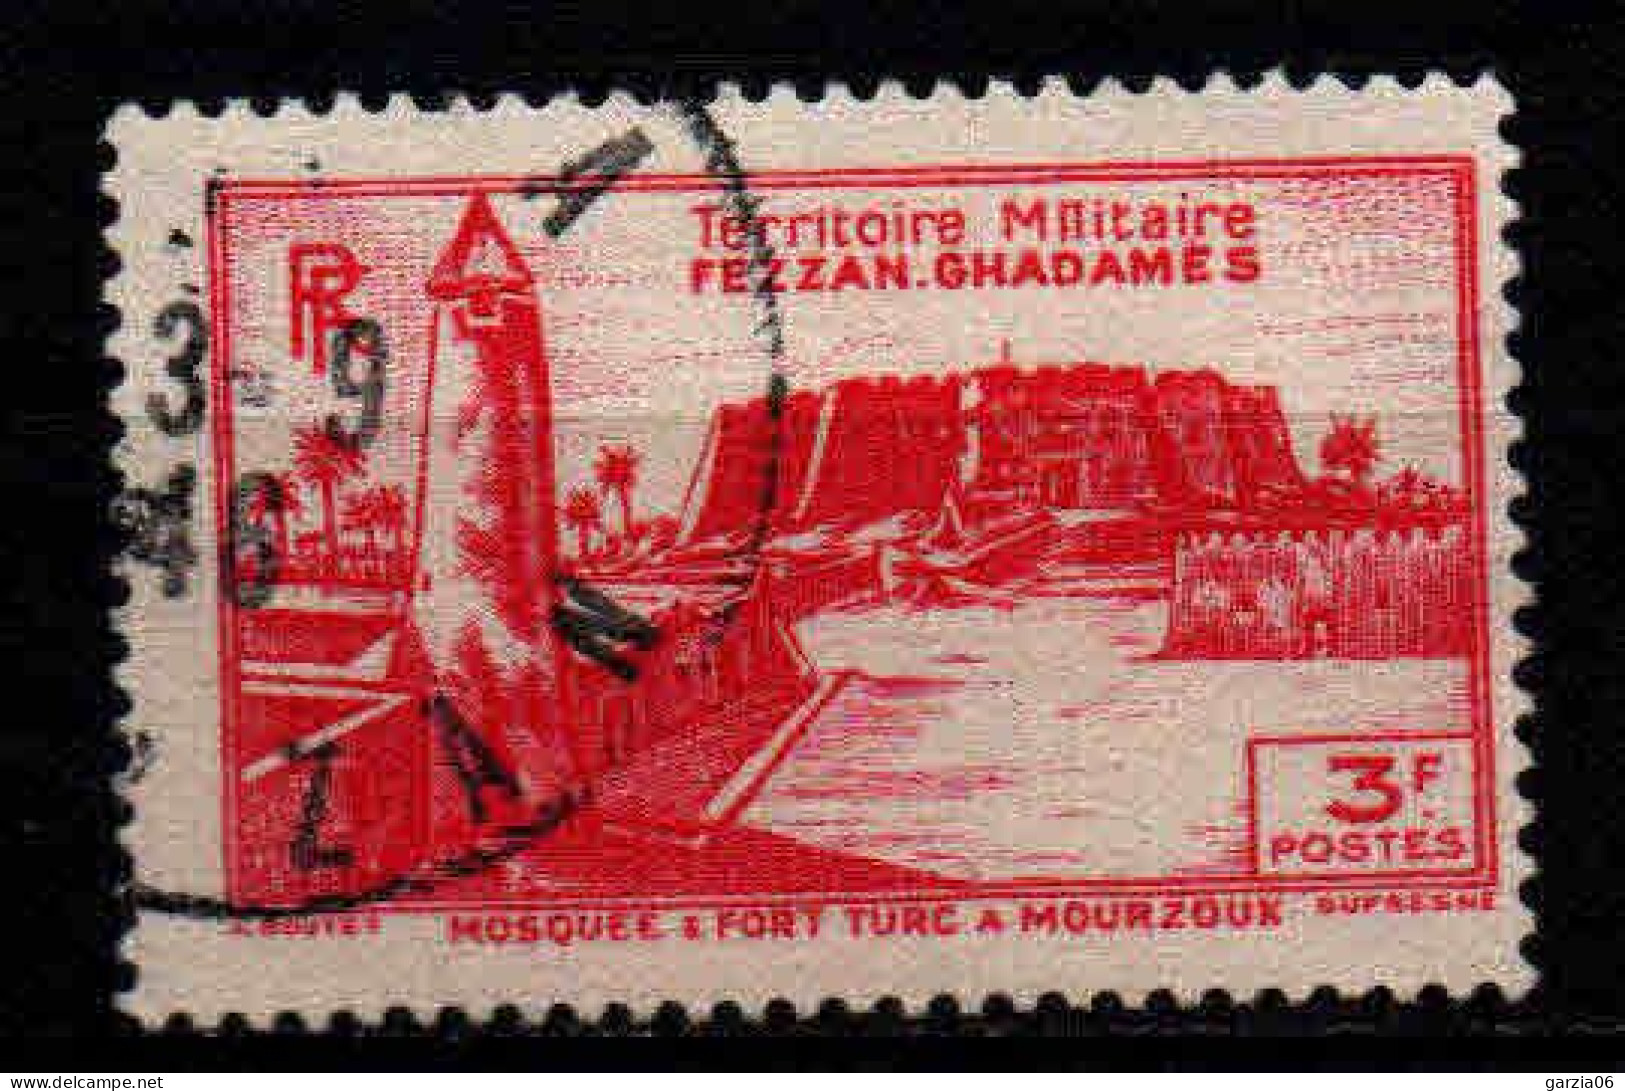 Fezzan  - 1946 -  Mourzouk  -   N° 34  - Oblit - Used - Used Stamps